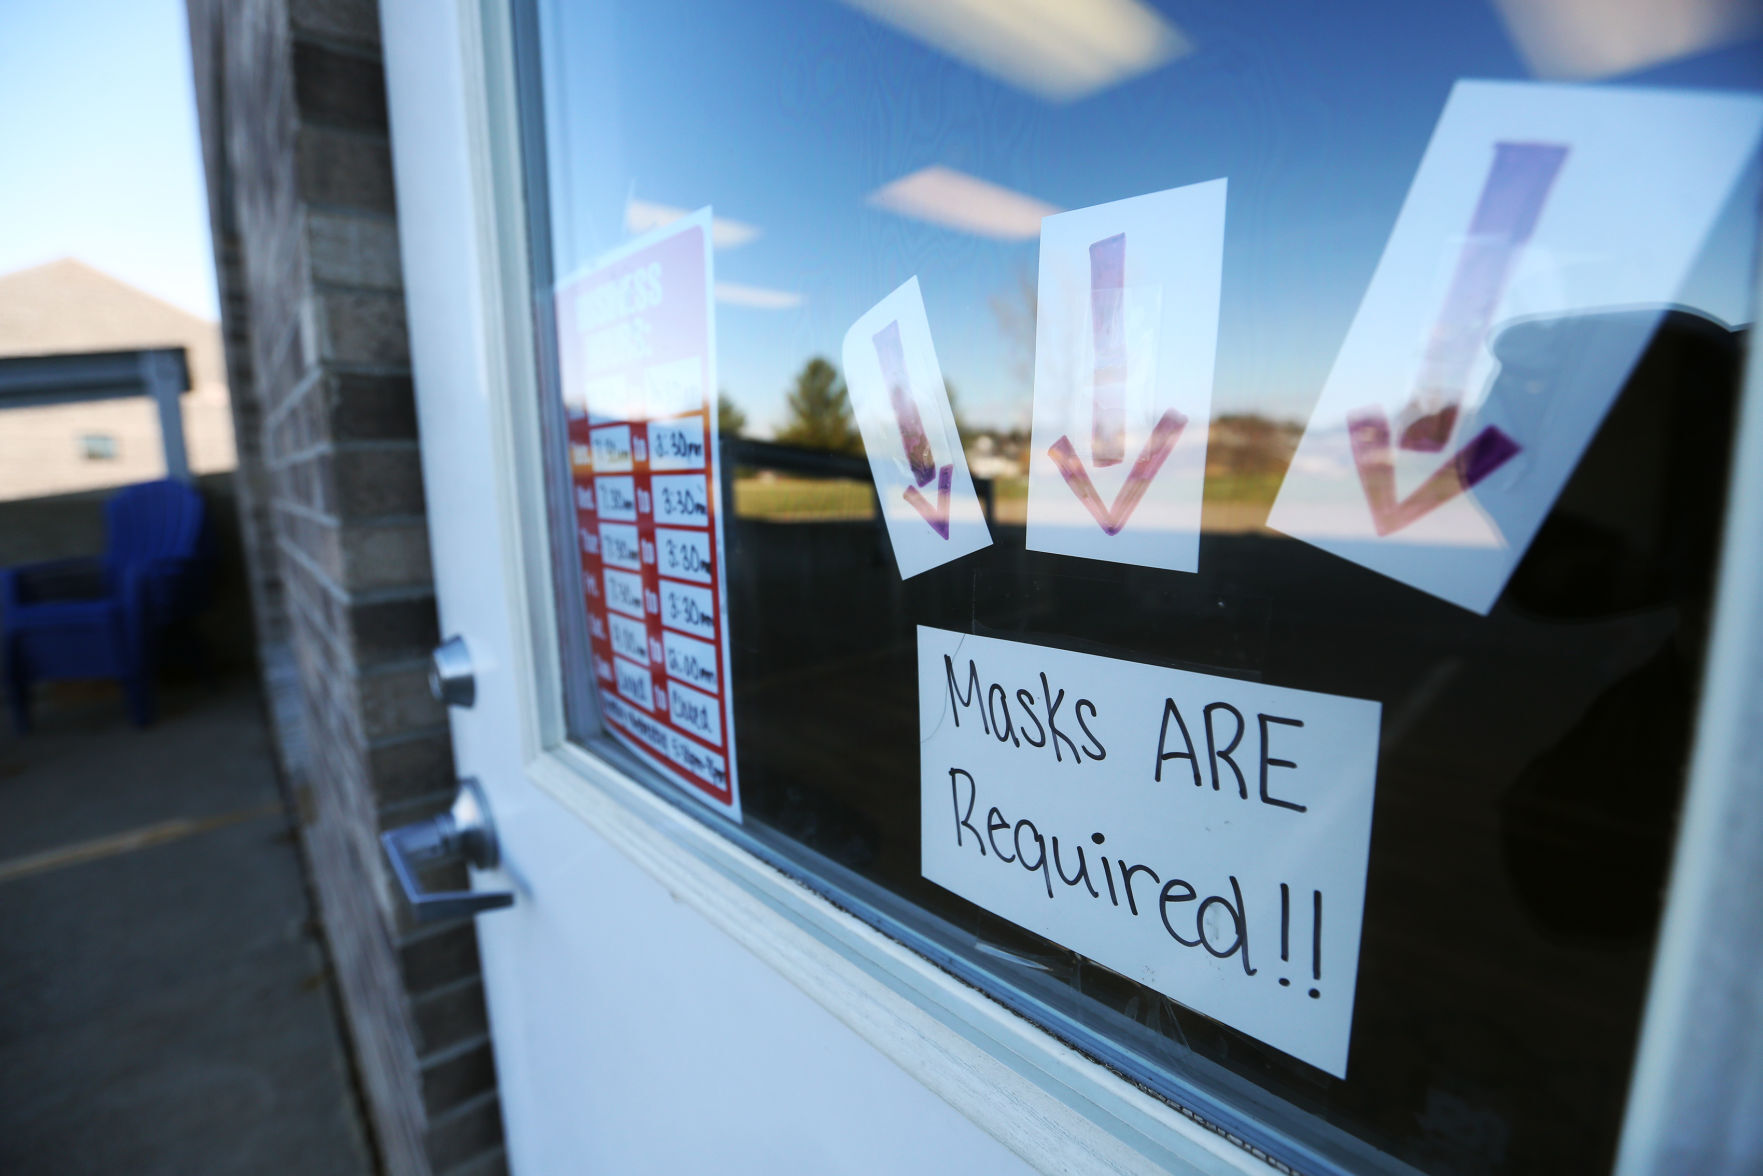 A sign regarding masks is displayed at NuFit at 5555 Saratoga Road in Asbury, Iowa, on Monday. PHOTO CREDIT: JESSICA REILLY